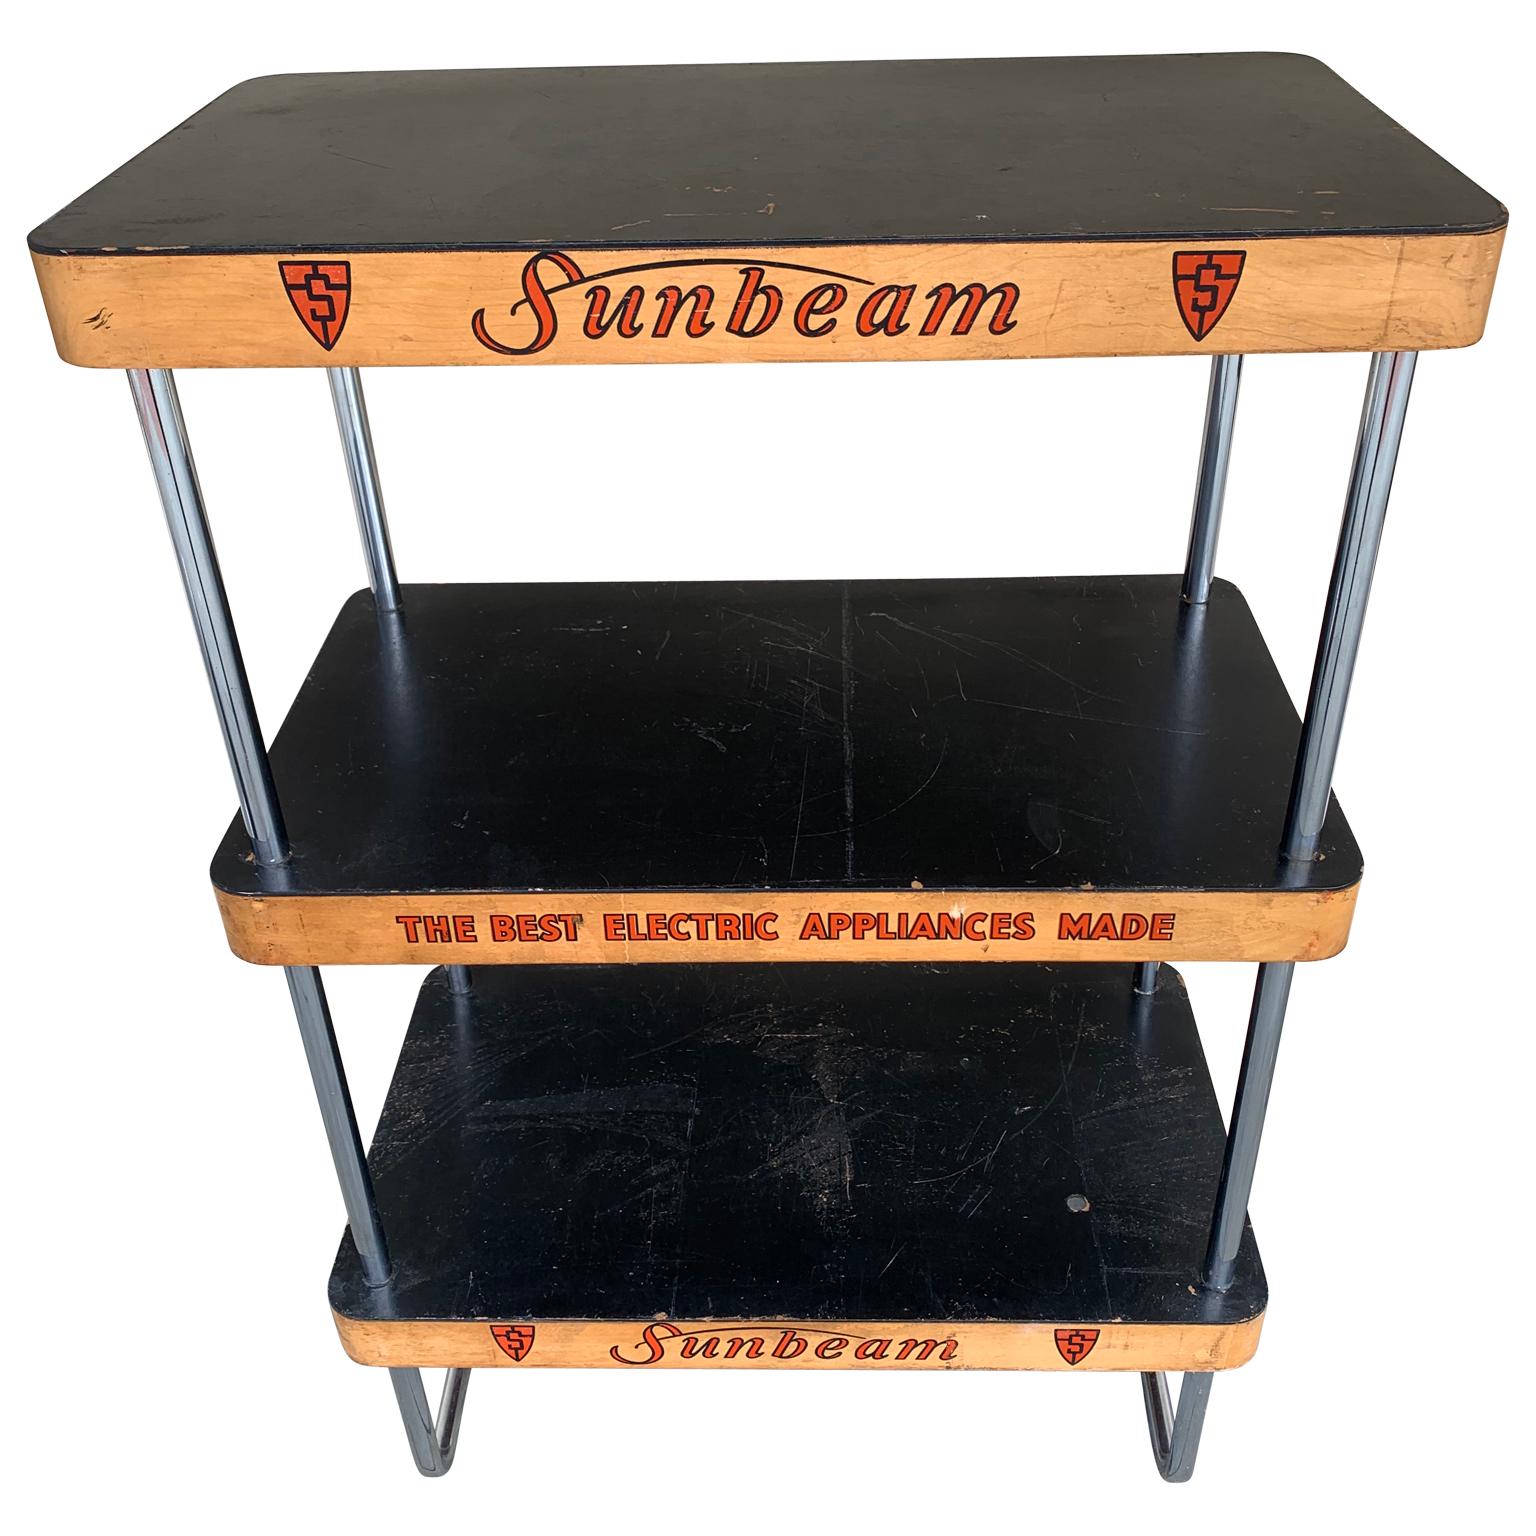 Mid-Century Modern Sunbeam appliance three-tier chrome and wood advertising shelving display case. Logo and company slogan is written in red letters on the sides of the shelves: 
